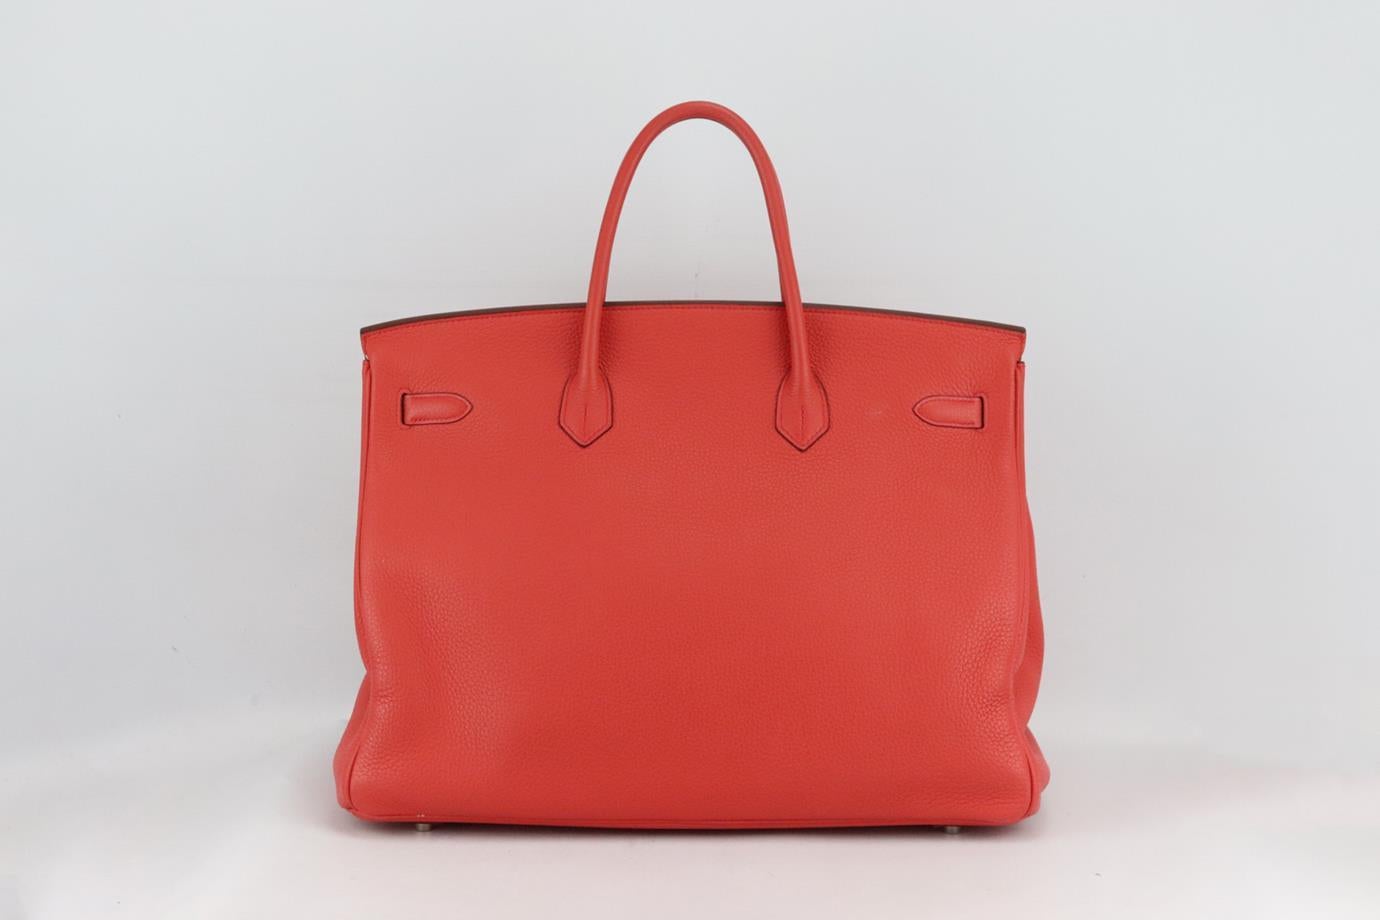 Hermès 2010 Birkin 40cm Togo Leather Bag In Excellent Condition For Sale In London, GB